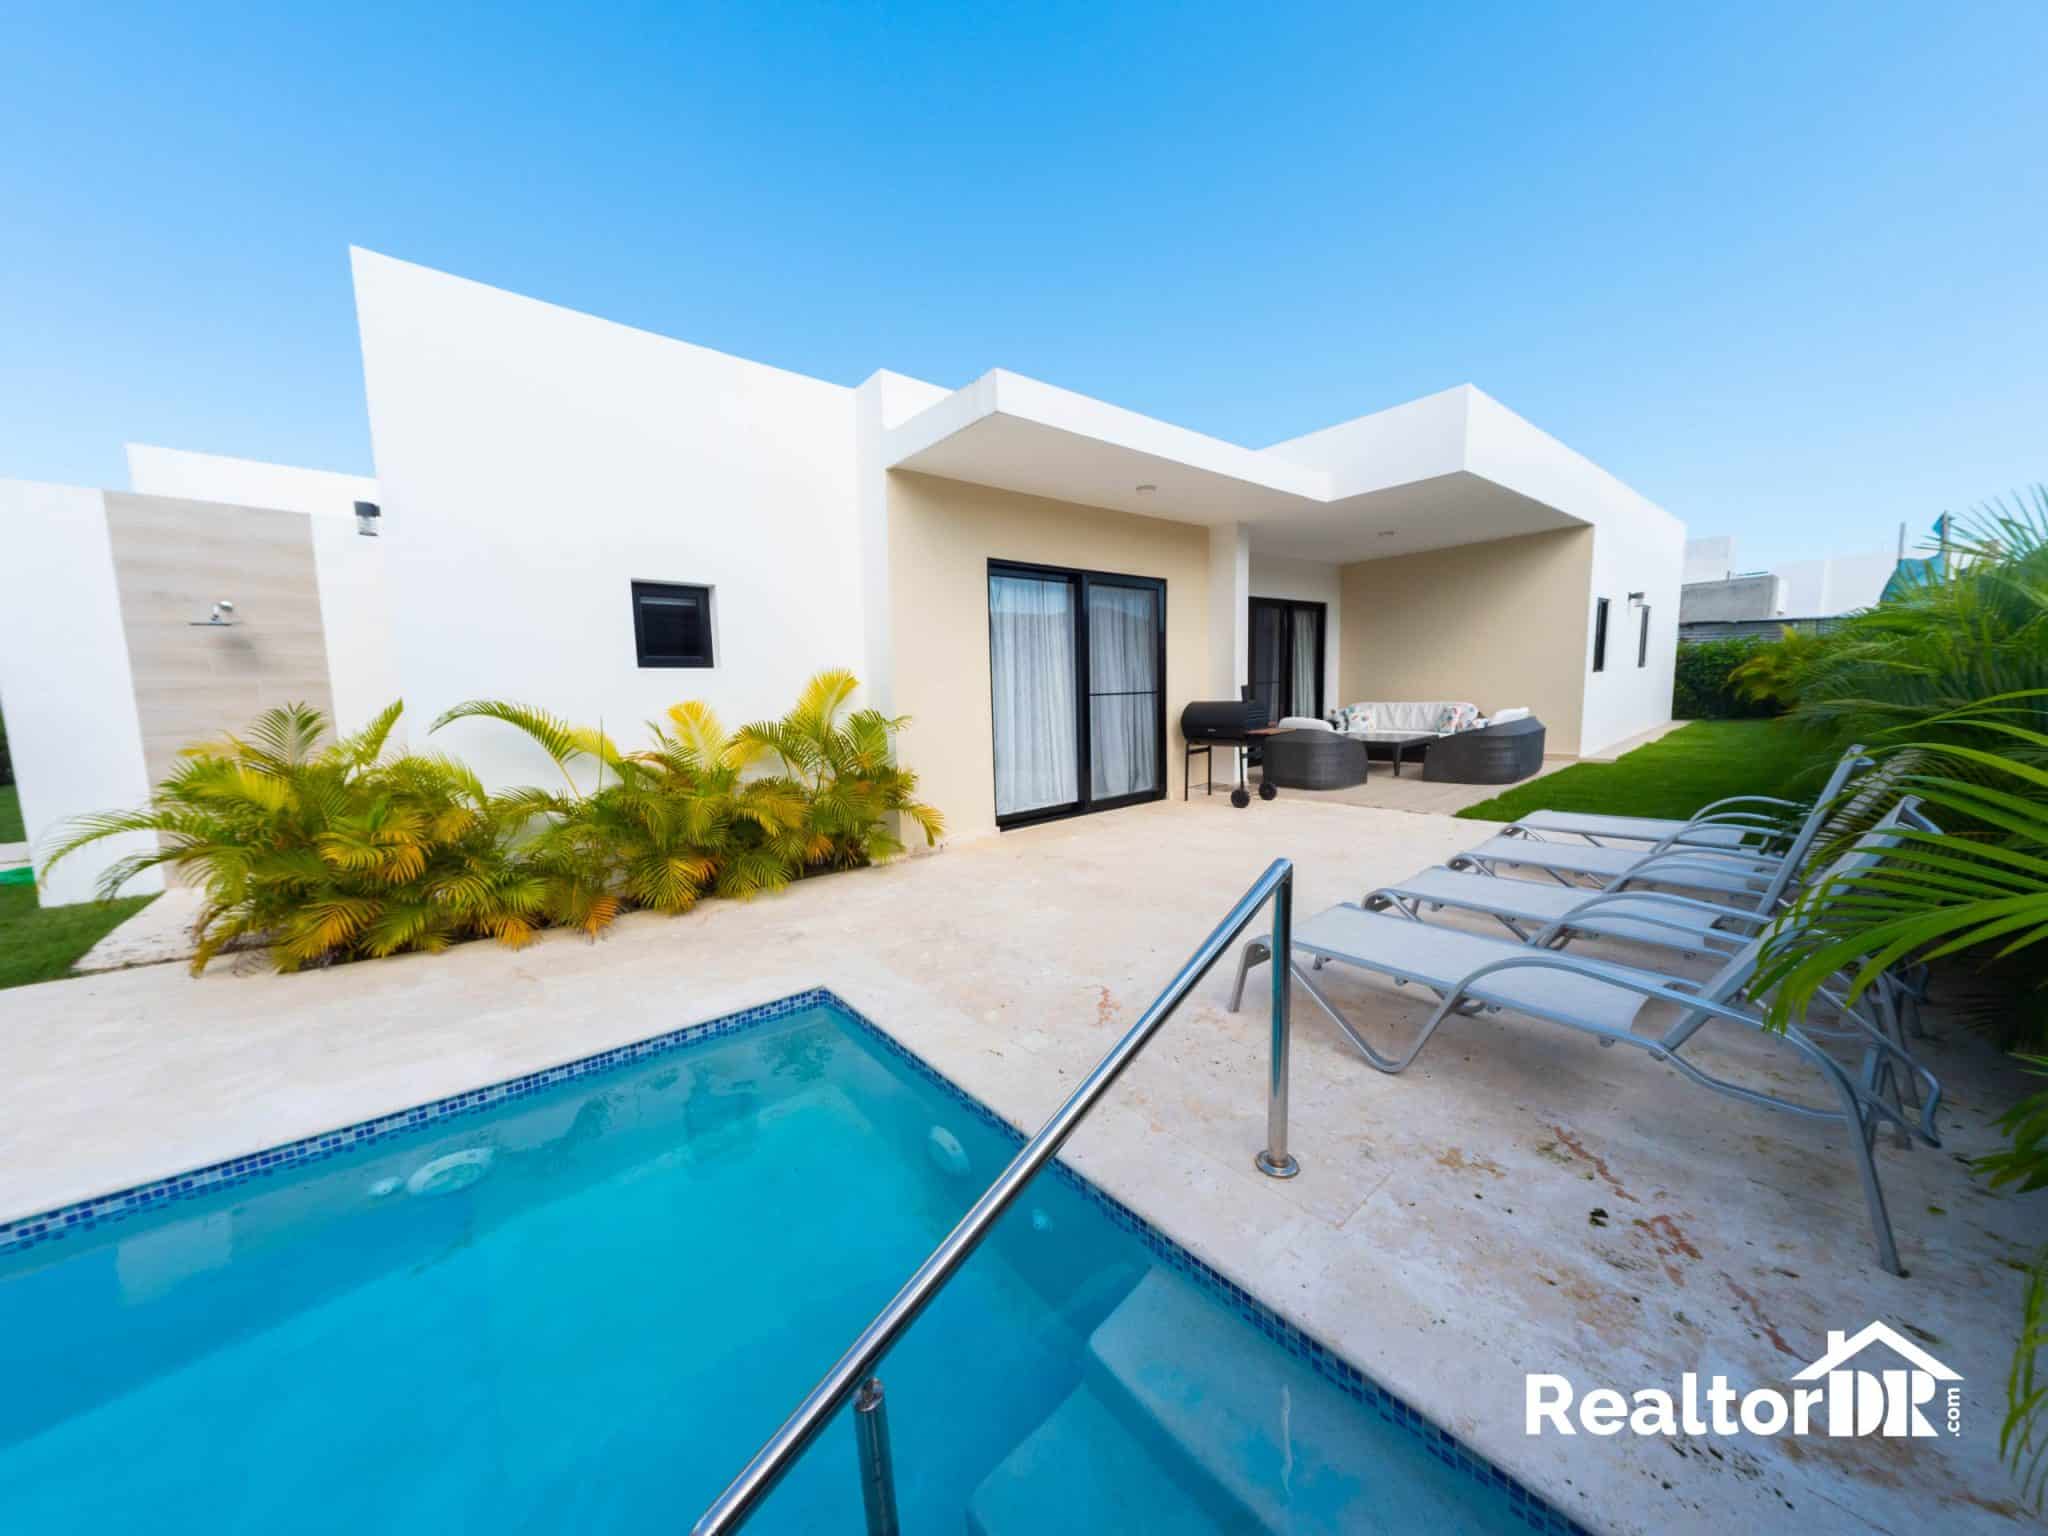 Newly Built Contemporary Home In The Highly Desirable Community of Sosua Ocean Village